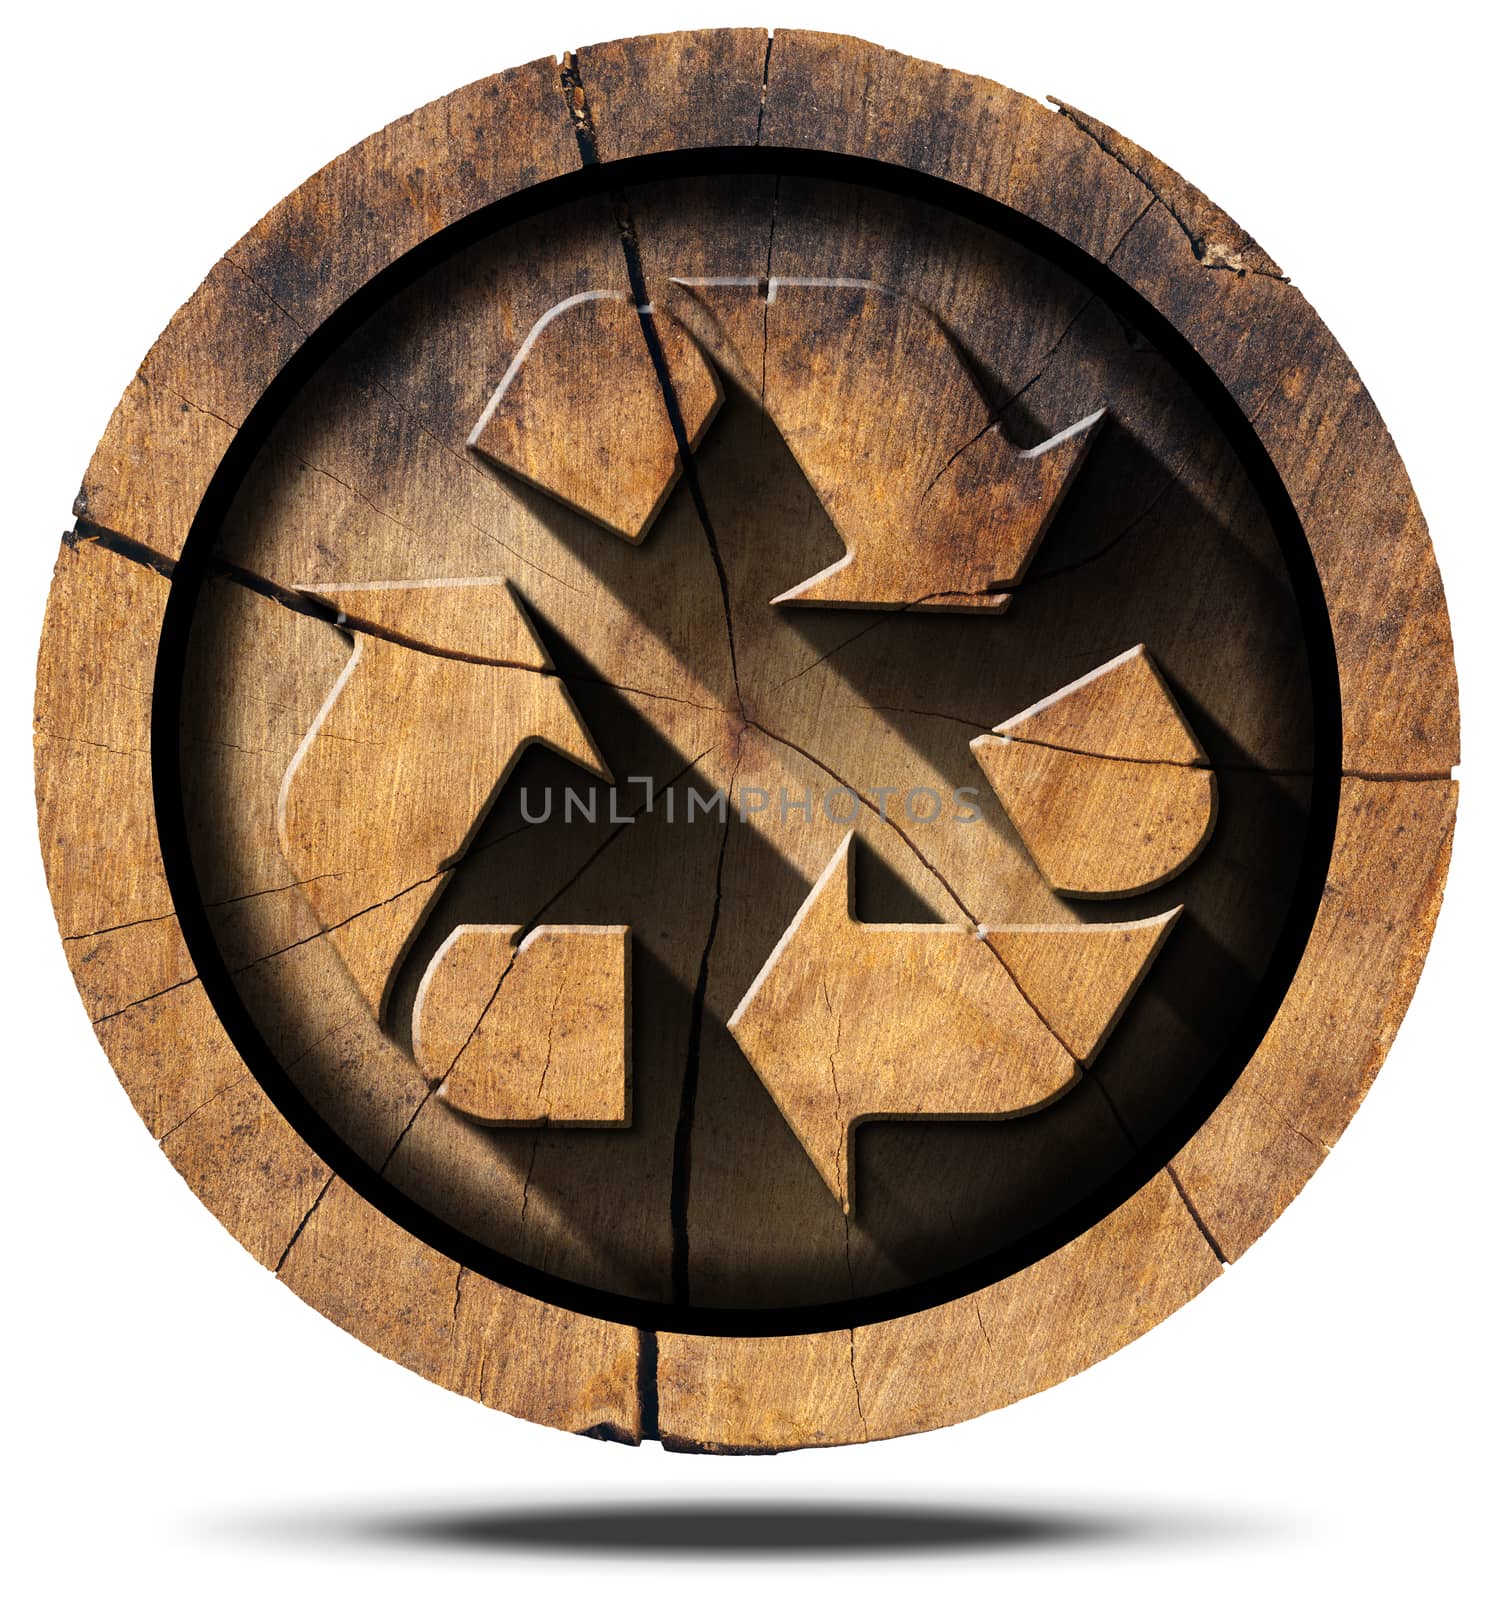 Wooden recycling symbol on a section of tree trunk isolated on white background.